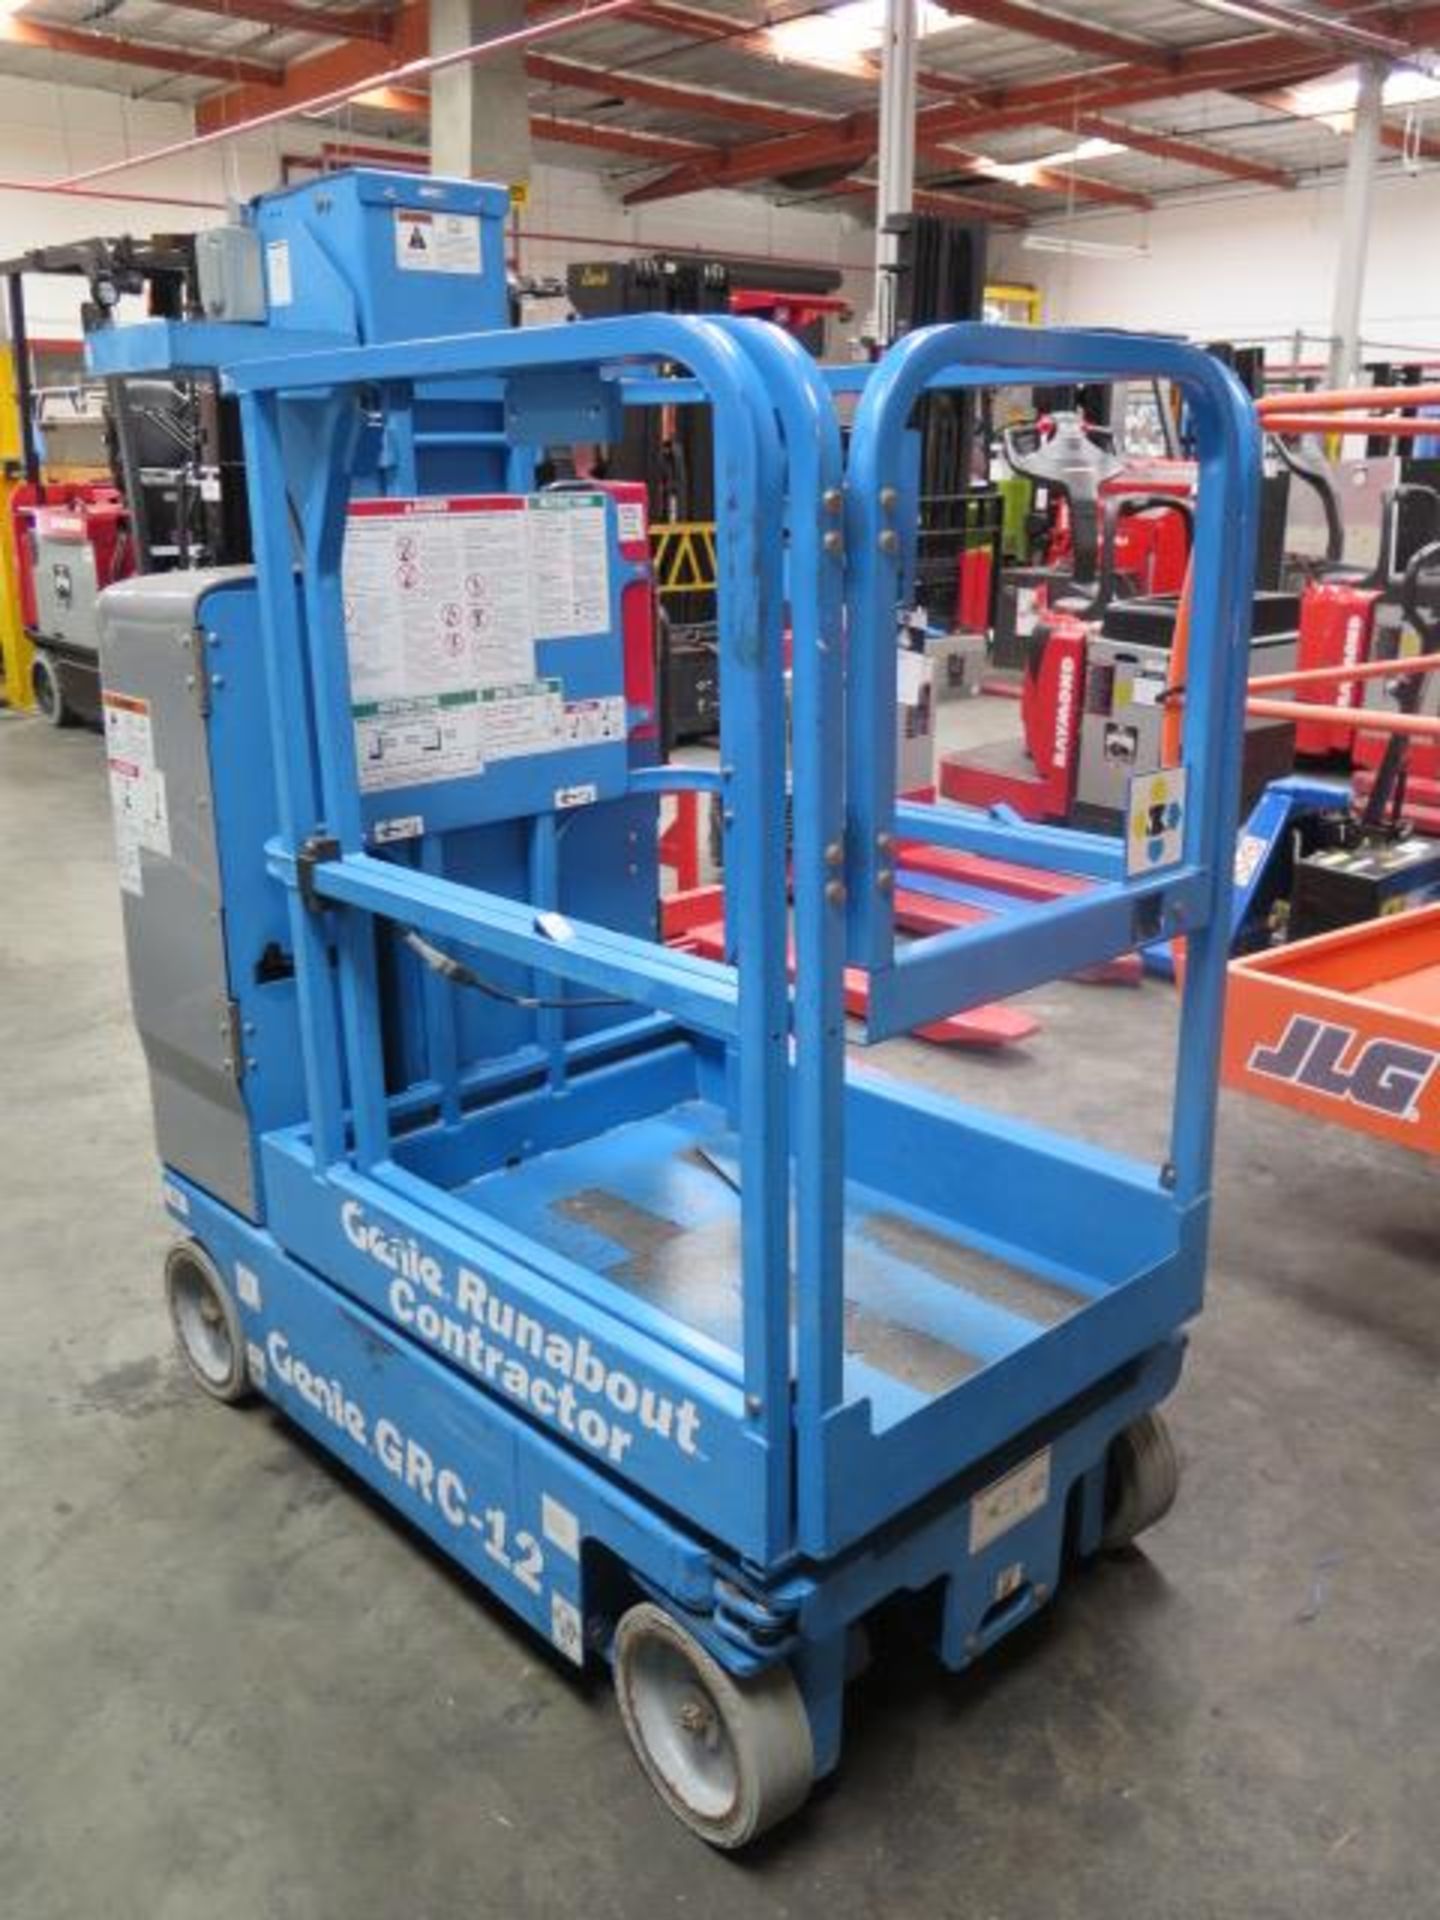 2010 Genie GRC-12 "Runabout Contractor" Electric Platform Lift s/n GRC10-315 w/ 12' Lift, SOLD AS IS